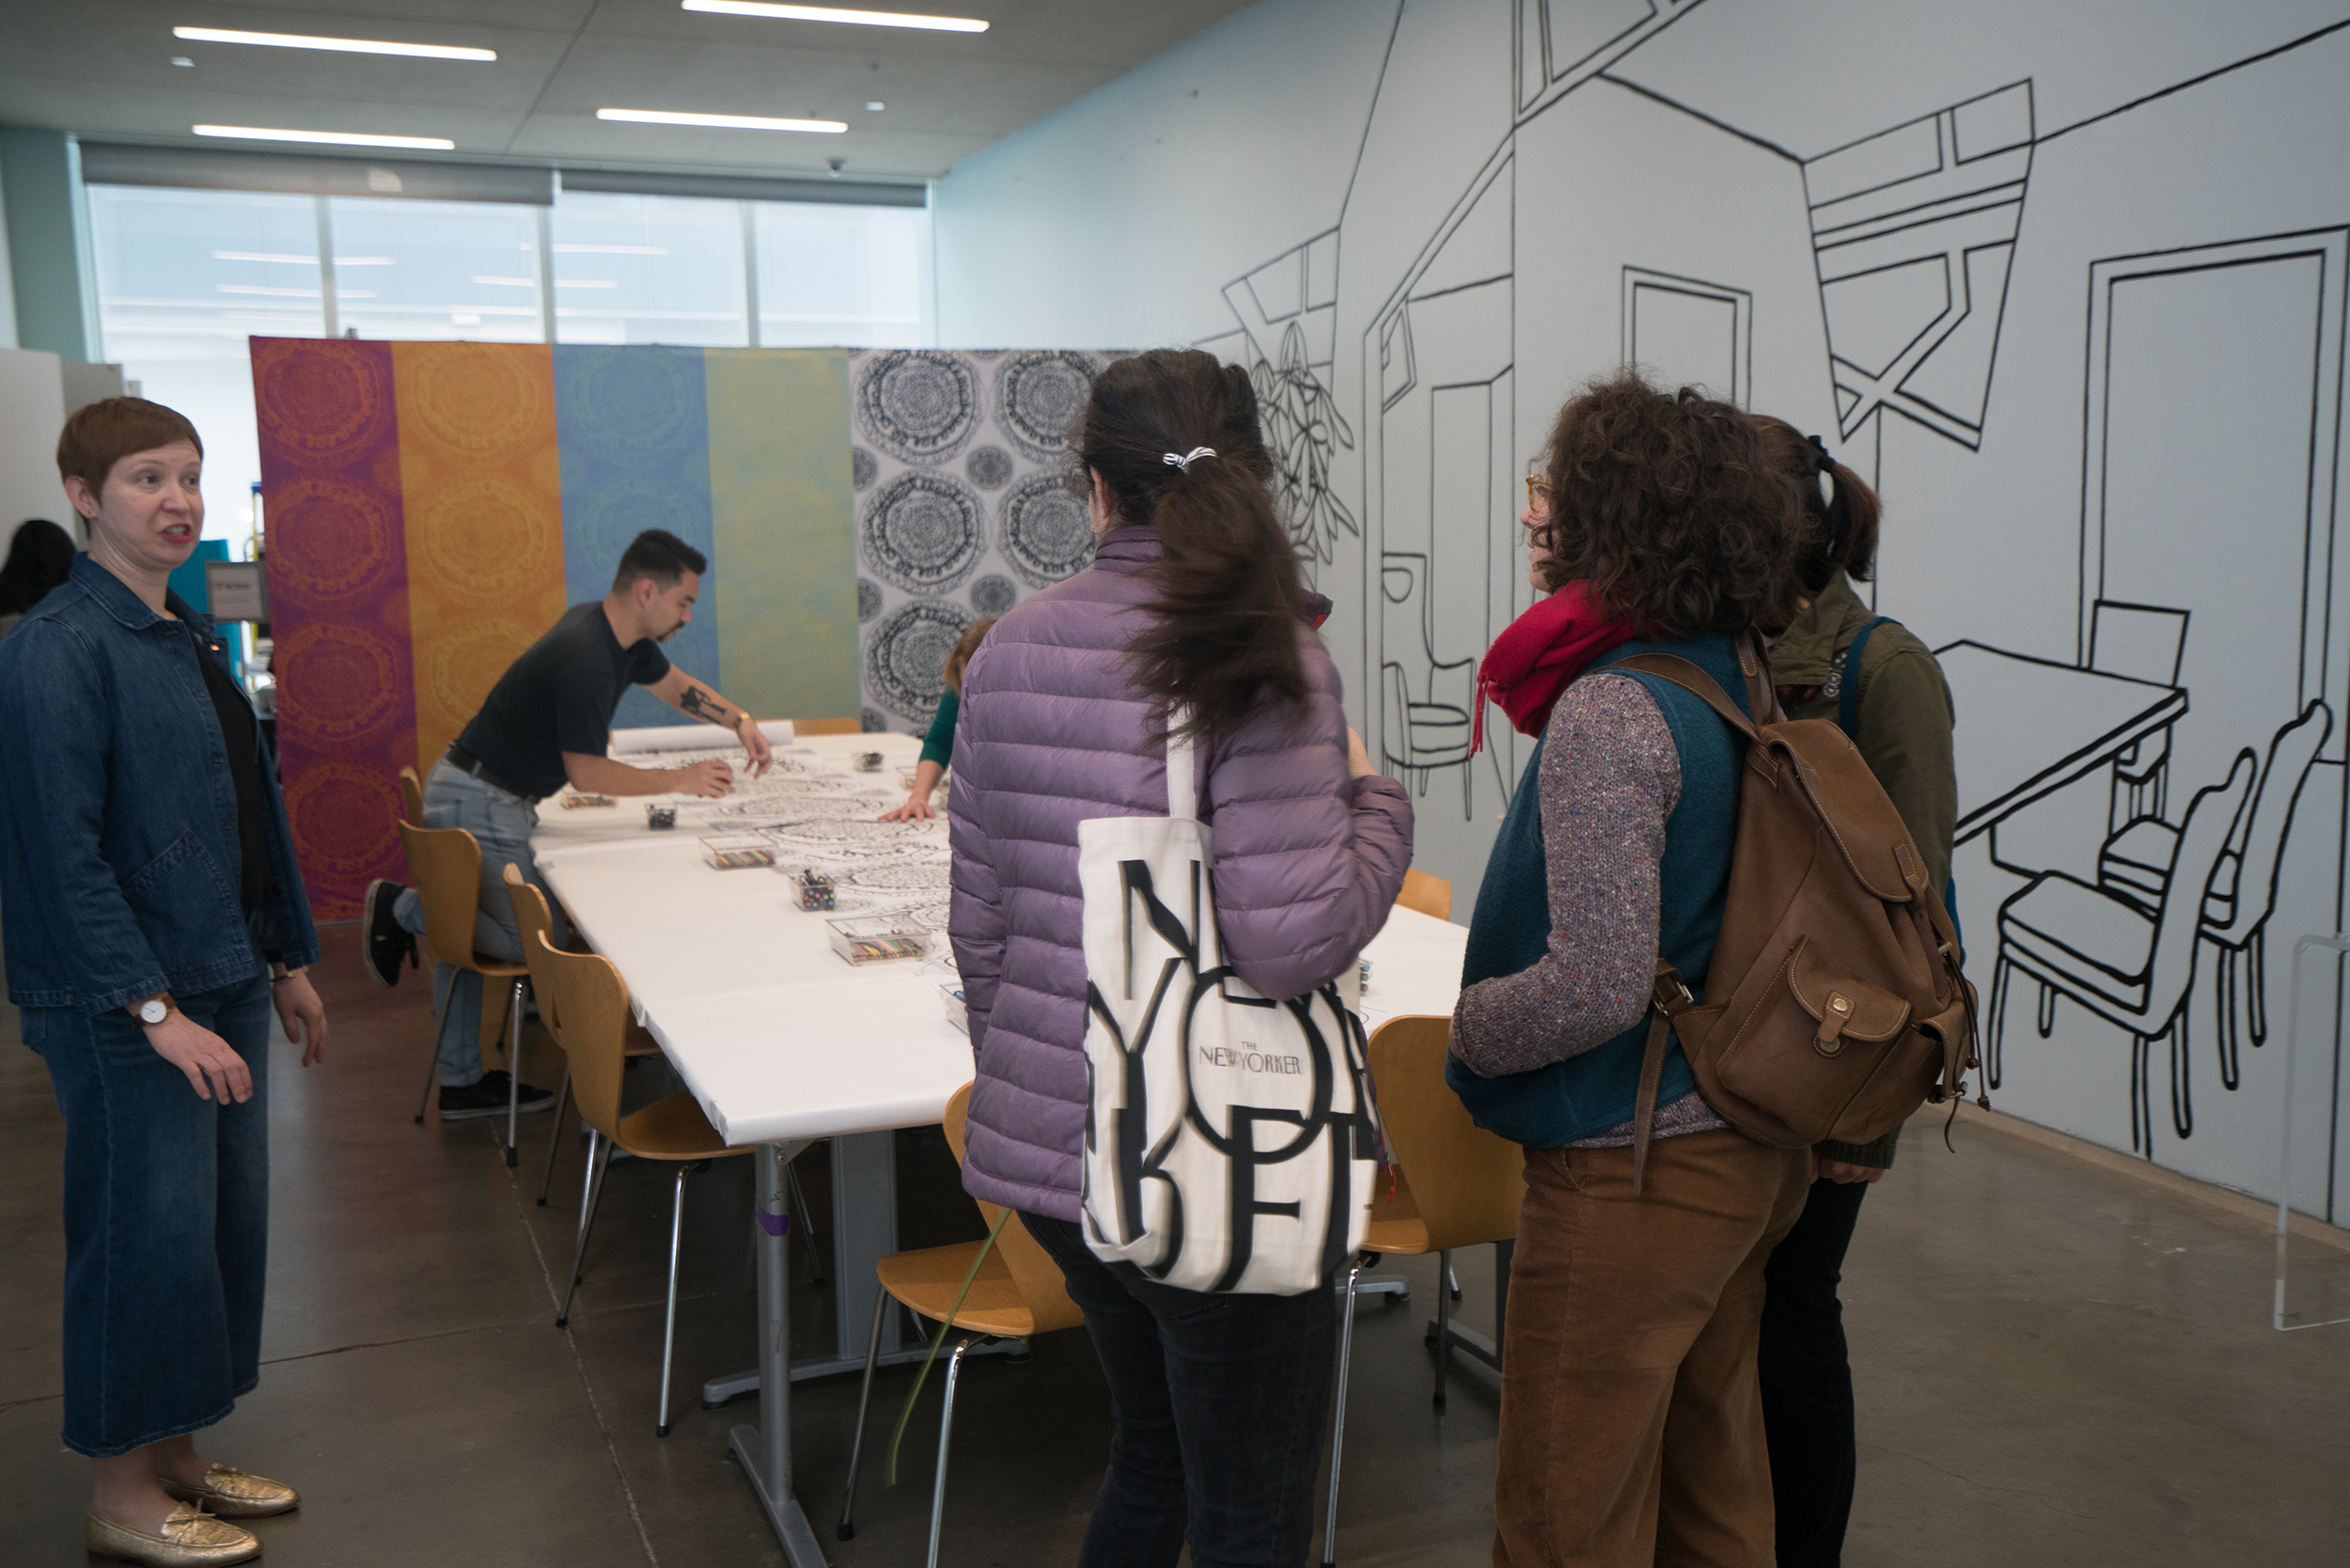   Hybrid Digital Home , Interactive Installation Installation View Museum Visitors Create Patterns and Fill the Line Drawing Using ScratchMIT’s Coding Platform The Institute of Contemporary Art, Boston 2018 